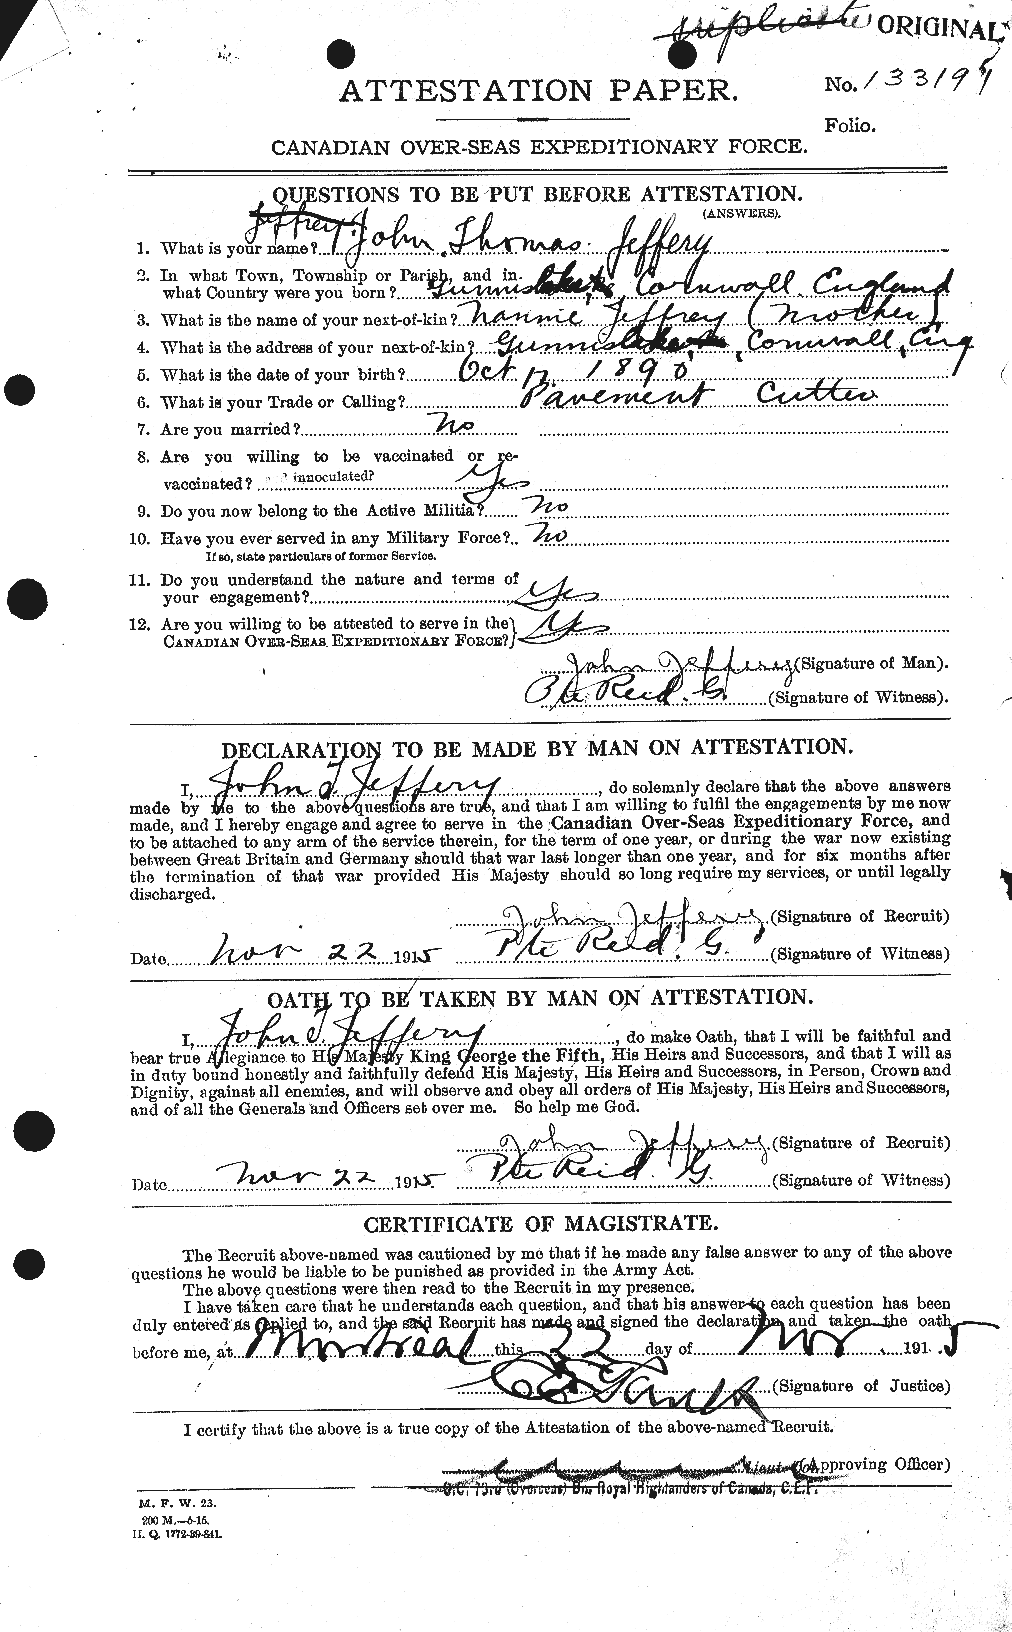 Personnel Records of the First World War - CEF 417782a